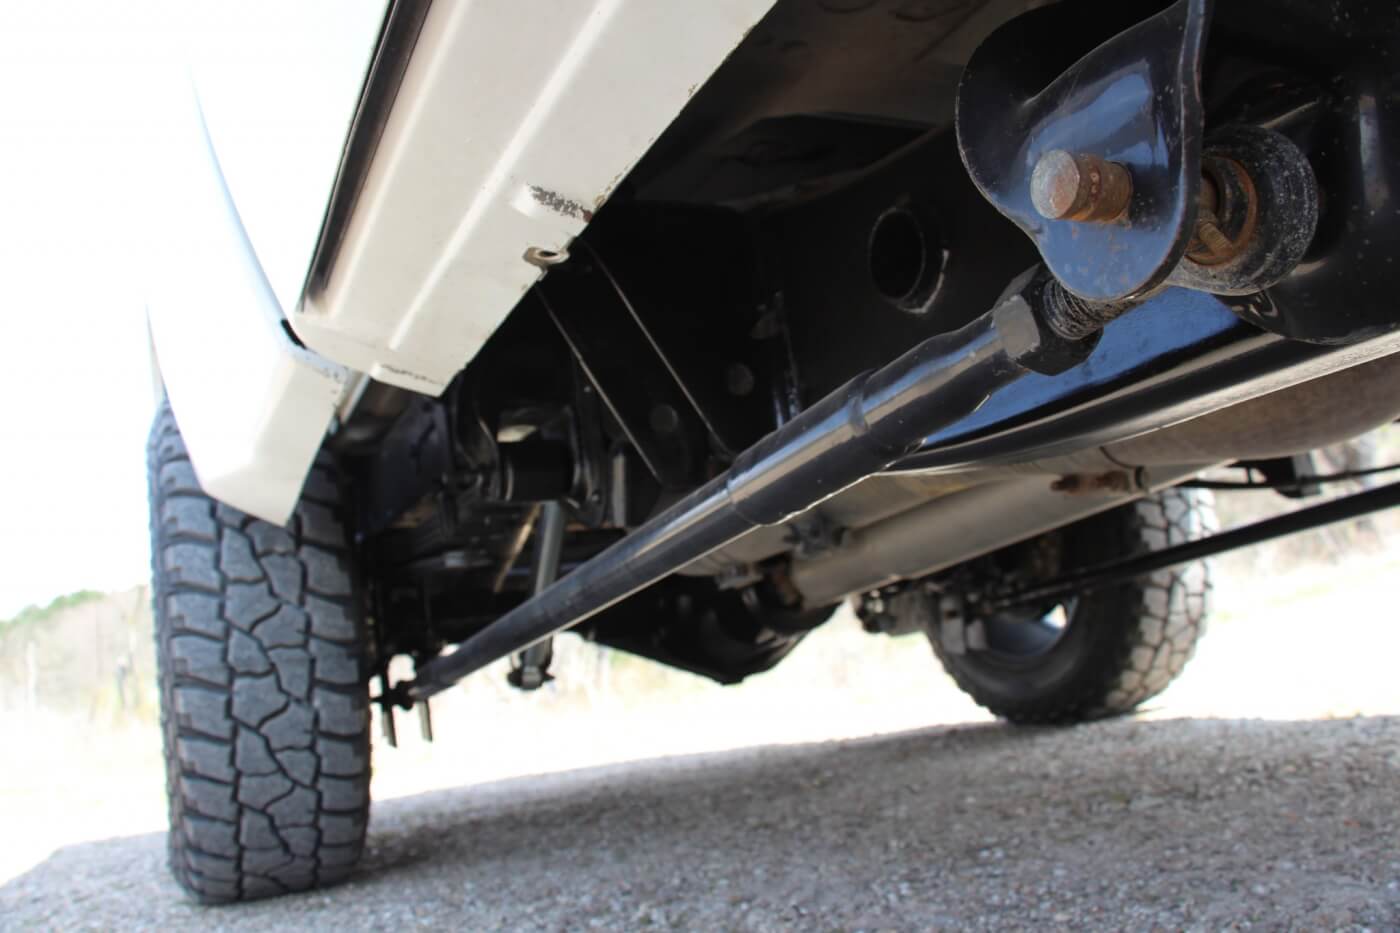 Kaden’s good friend, Jon Elliott, built the traction bars harbored under the truck. Made with heavy-duty Schedule 80 pipe, they haven’t skipped a beat so far—surviving their fair share of sled pull and drag-strip abuse.